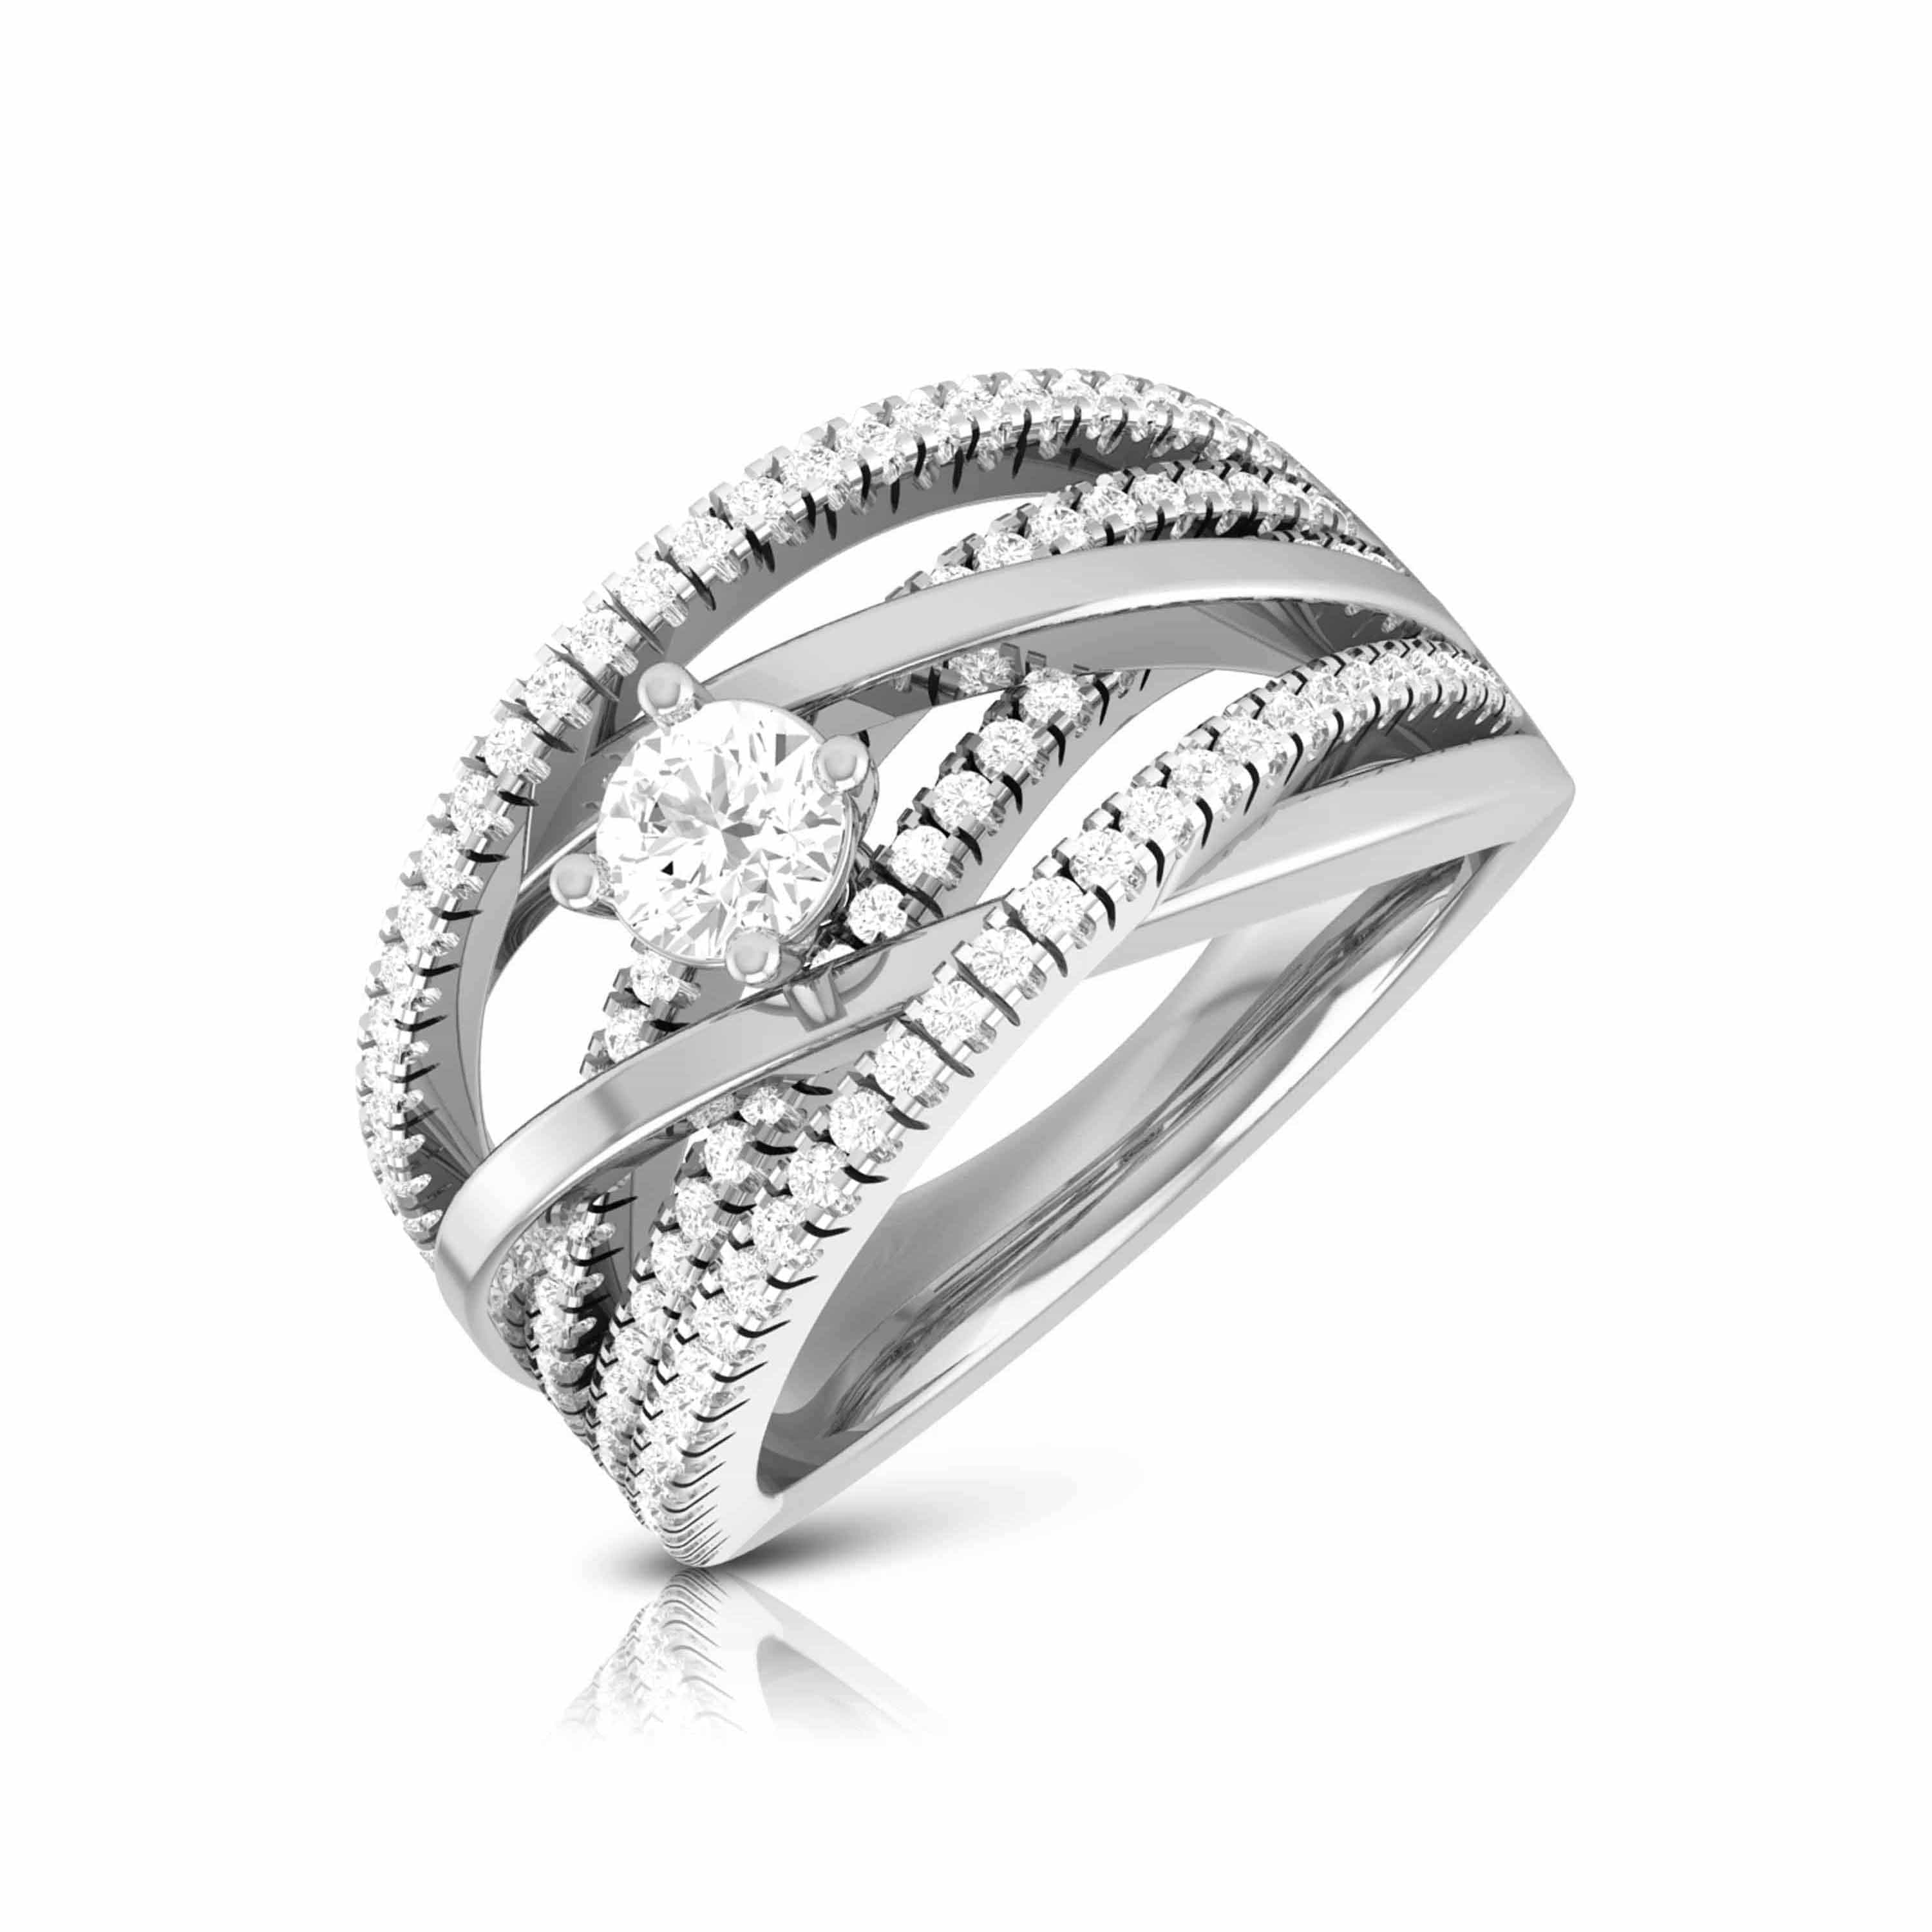 Ring Designs for Women - Love Wedding Bands